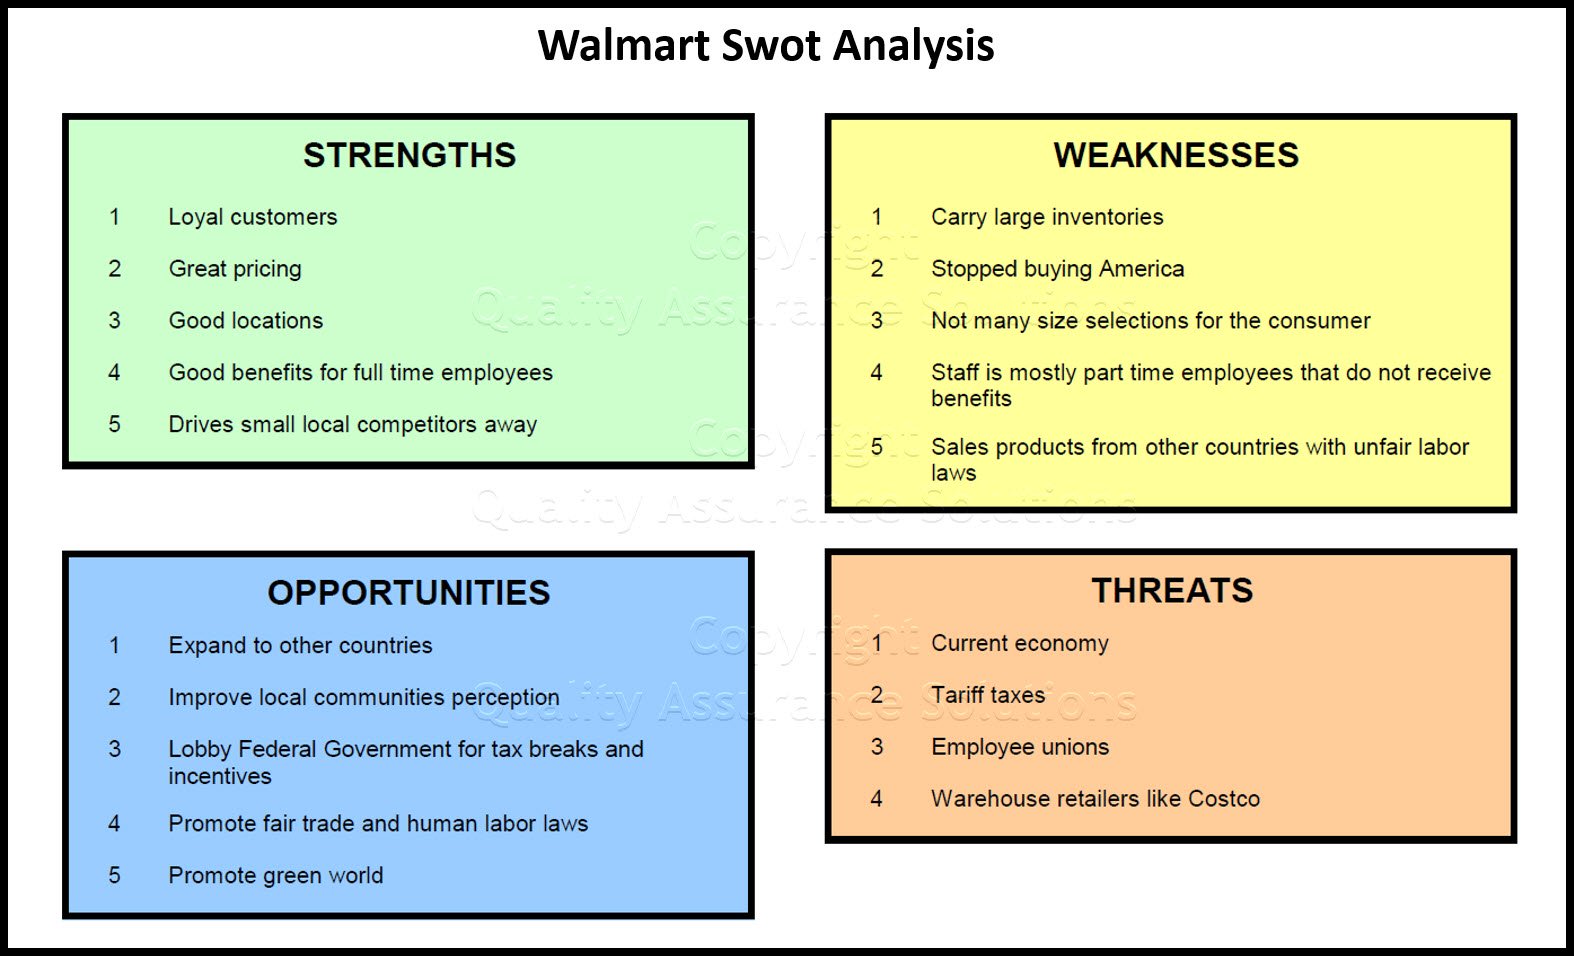 Here is an example of swot analysis of wal mart. Feel free to add to your ideas to this wal mart swot analysis.